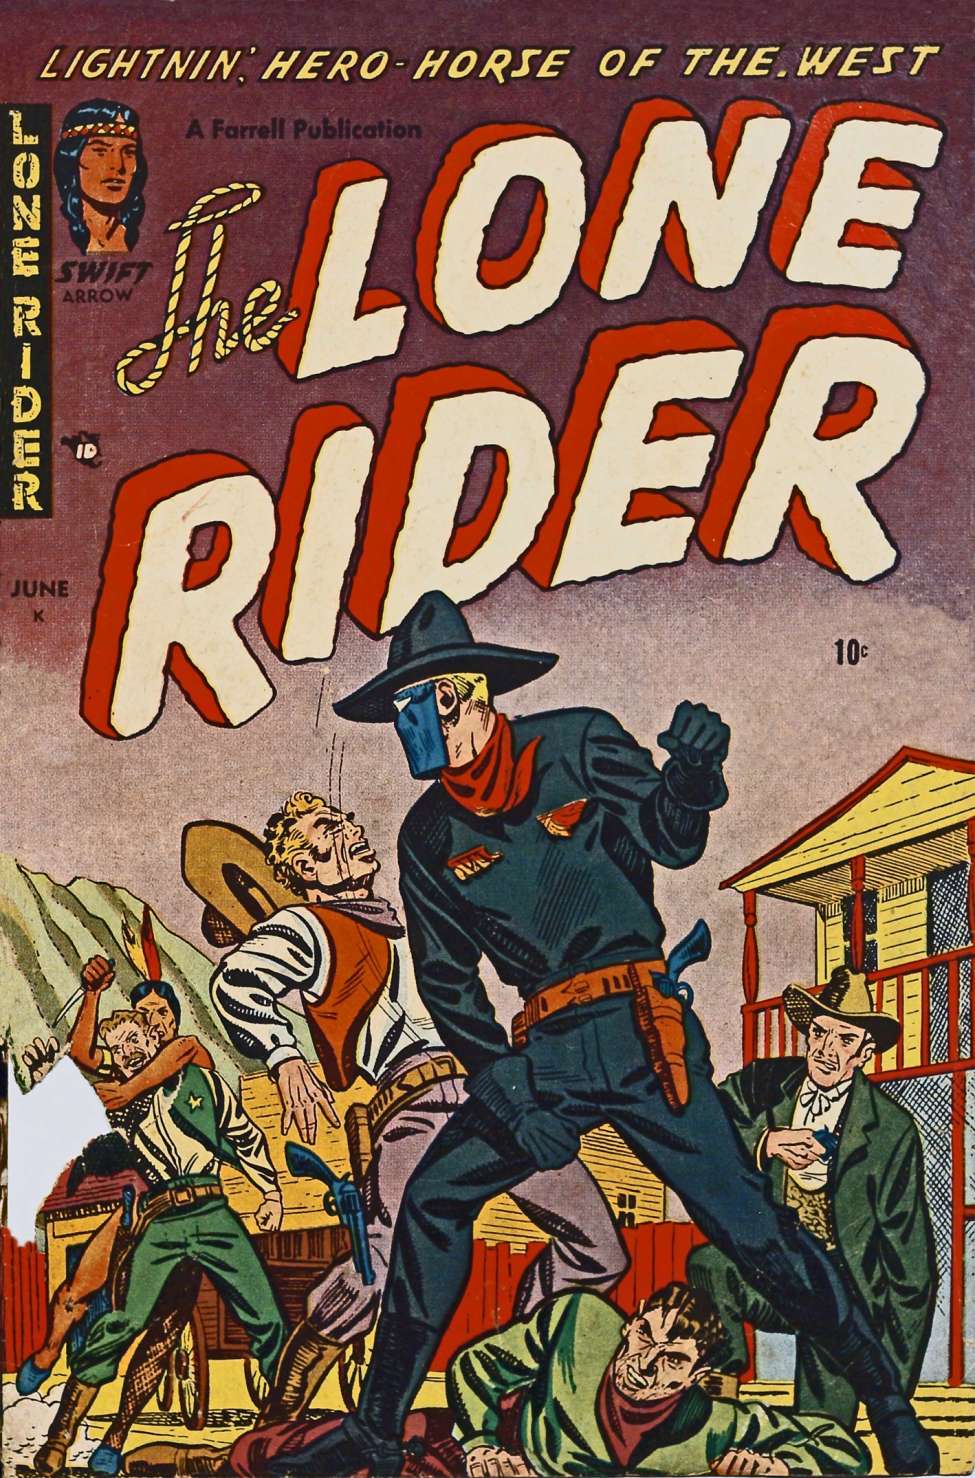 Book Cover For The Lone Rider 8 - Version 2